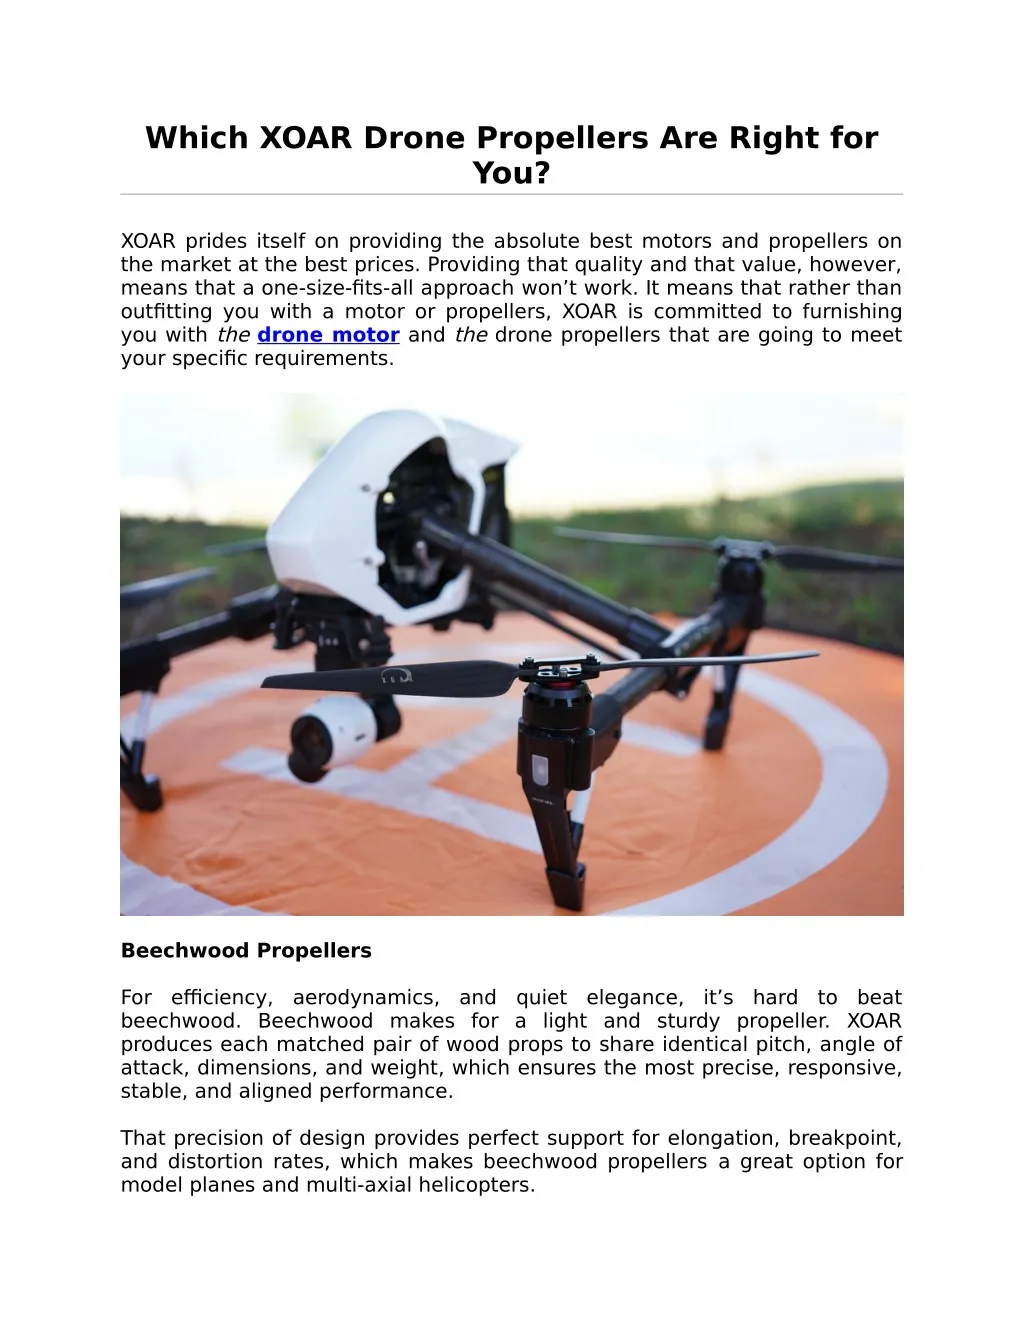 which xoar drone propellers are right for you